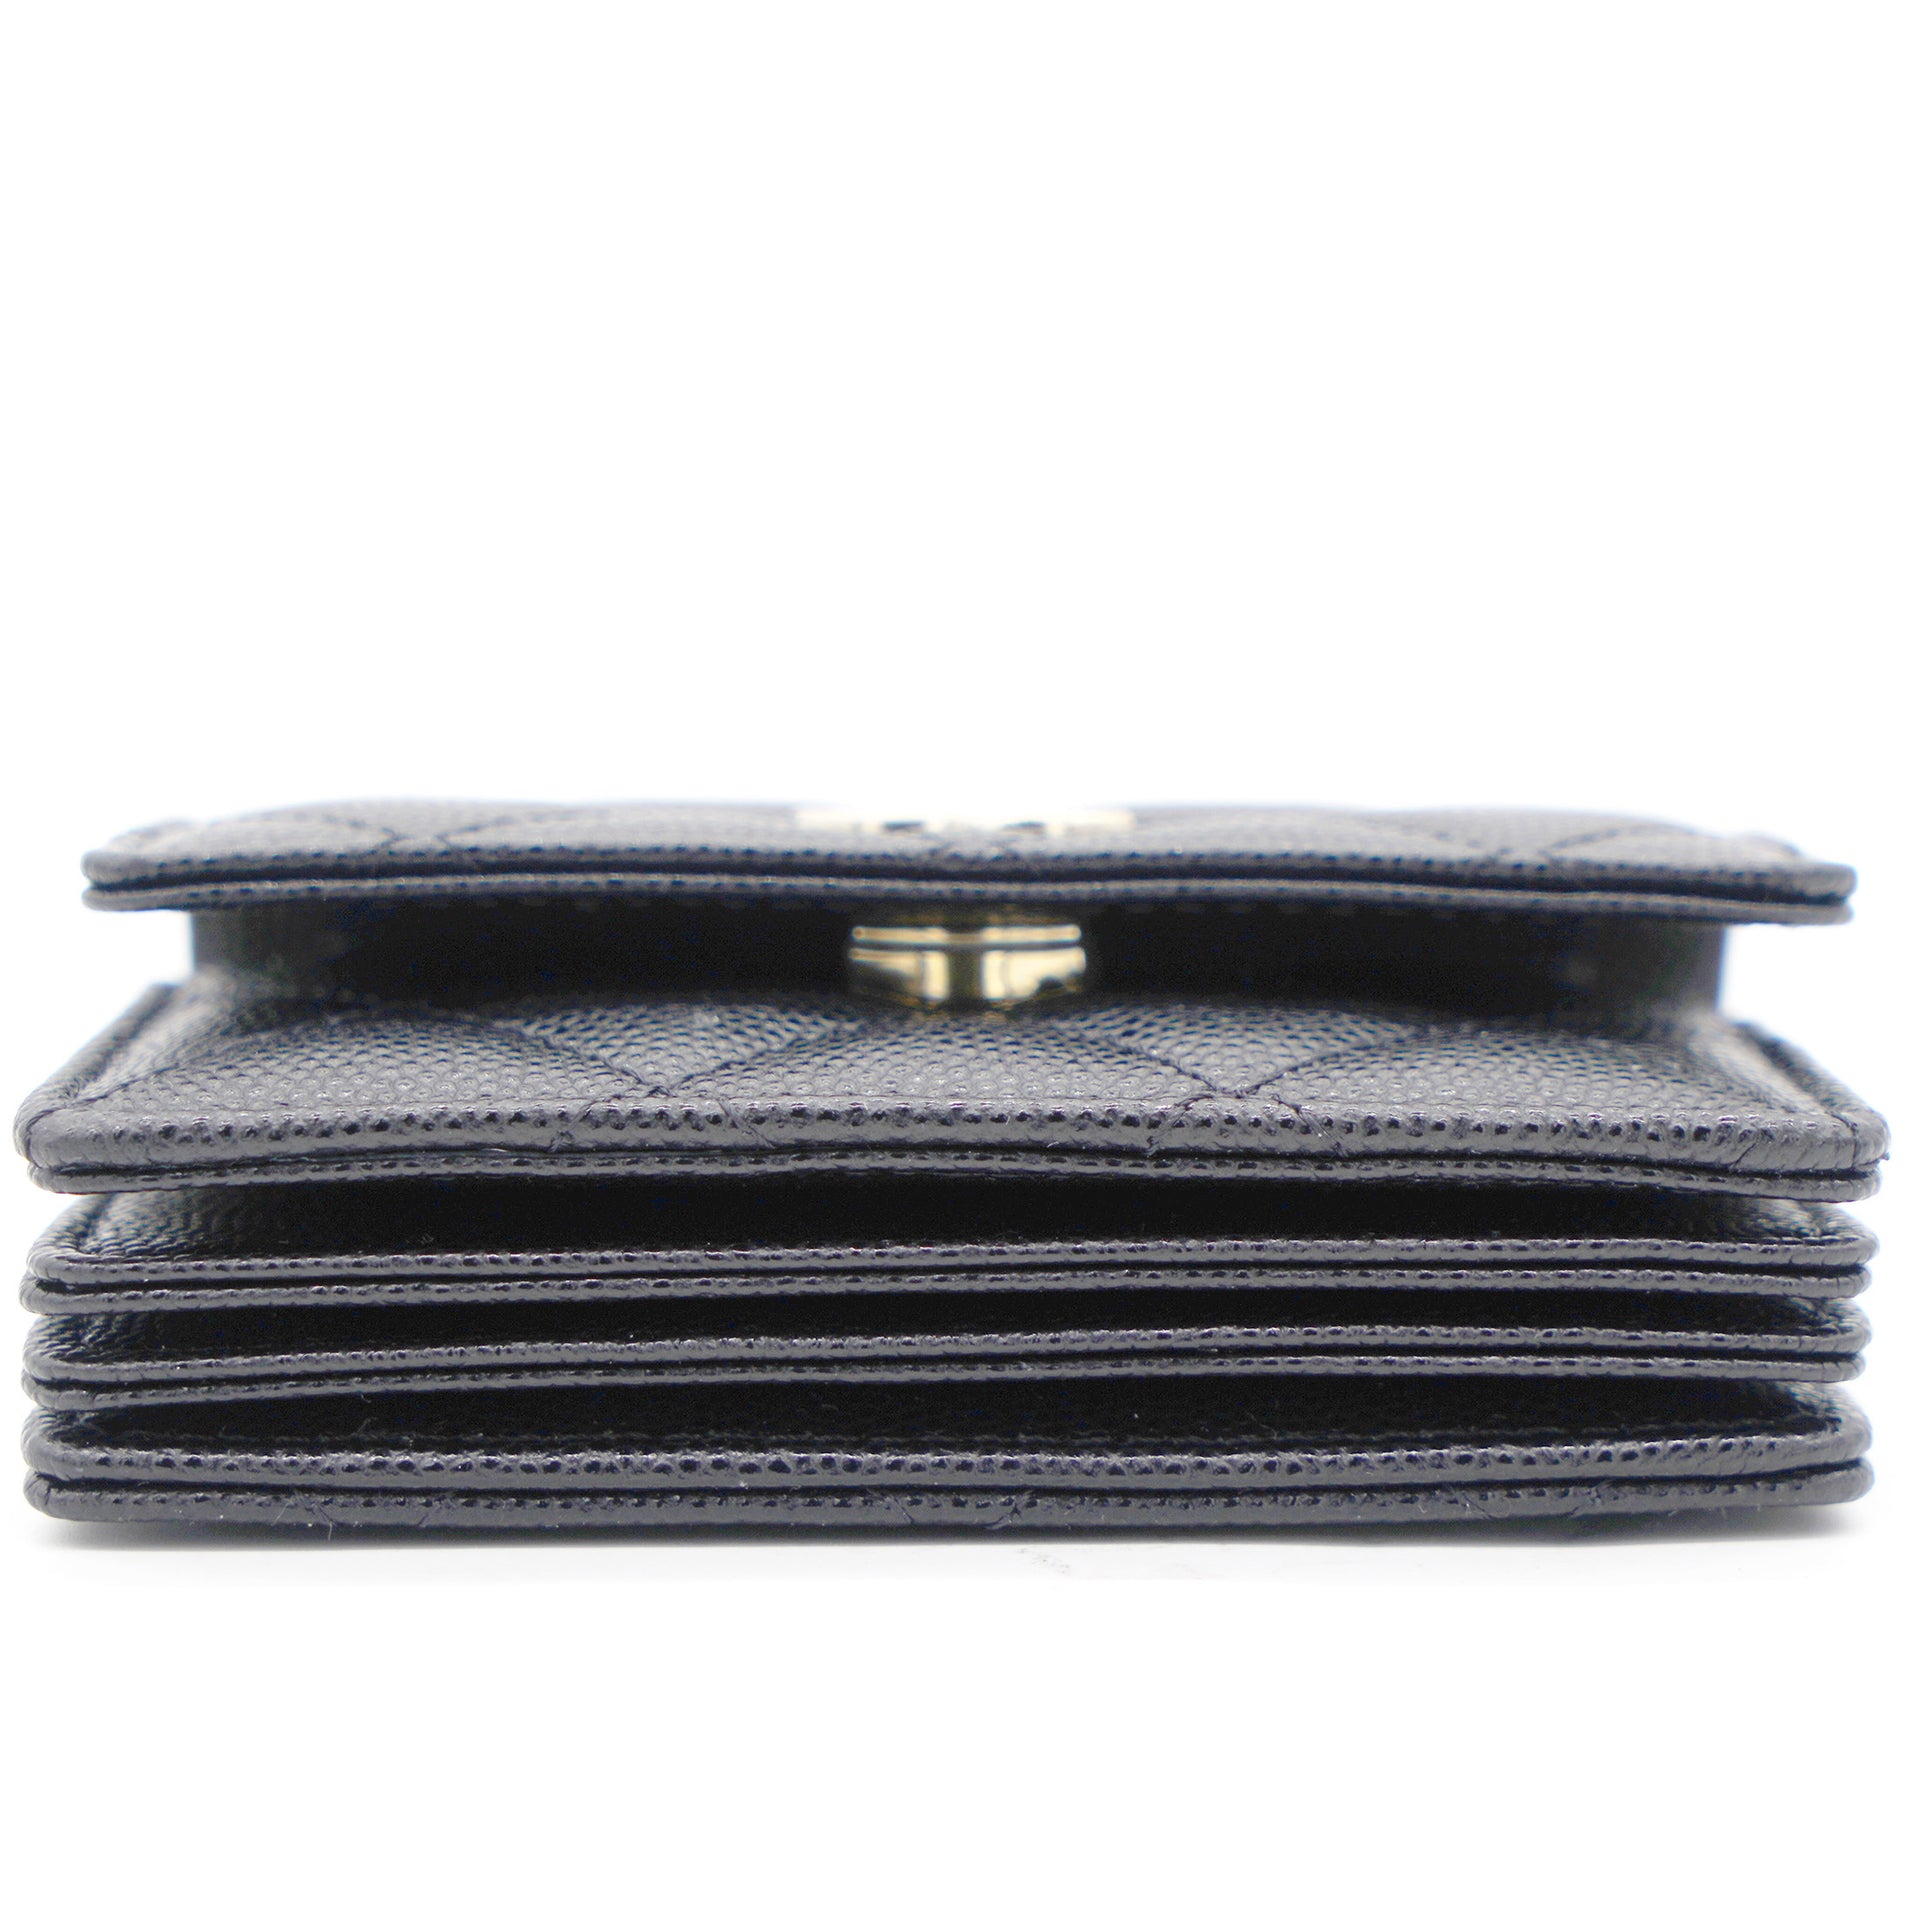 Chanel Black Quilted Caviar Leather Flap Card Holder with Charm